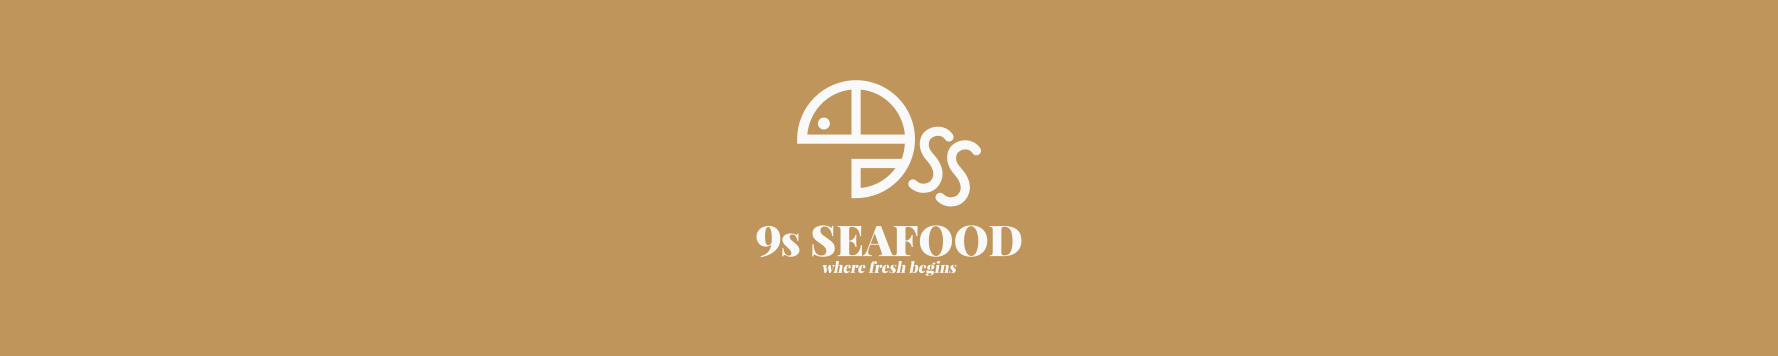 The final logo for 9s Seafood